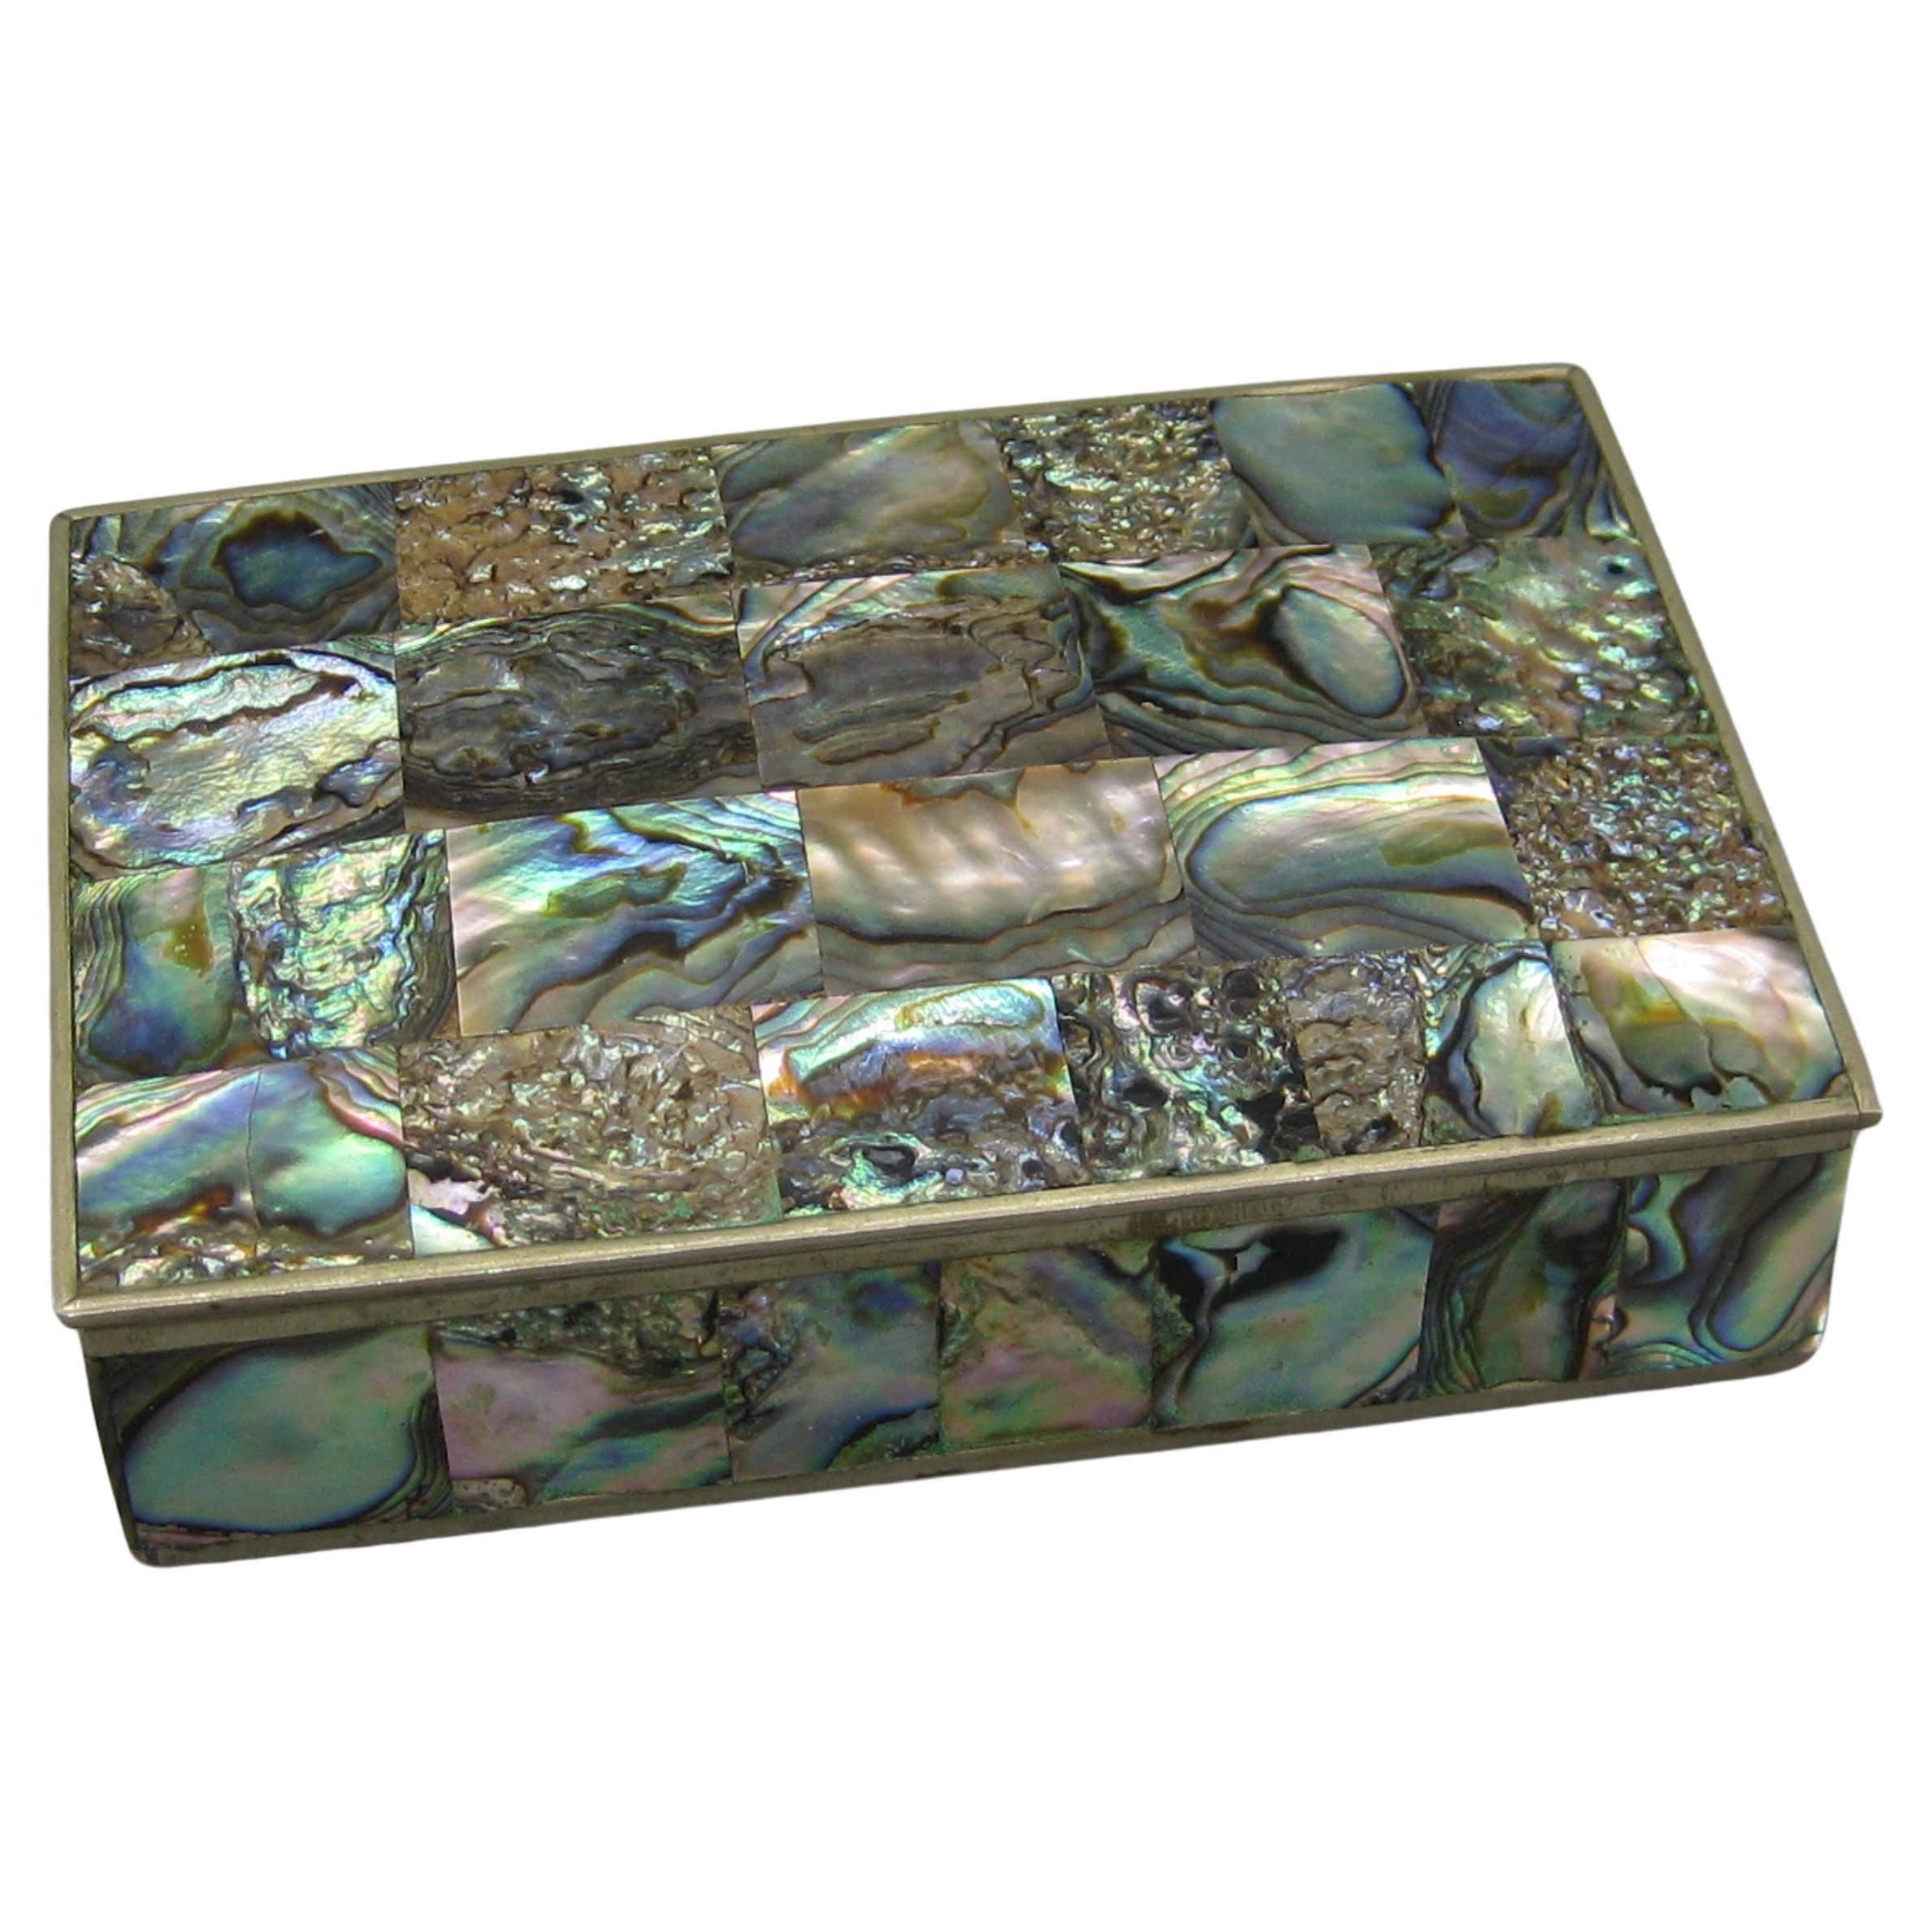 Handcrafted Mexico Mixed Metal Abalone Shell Desk Stash Trinket Cigarette Box